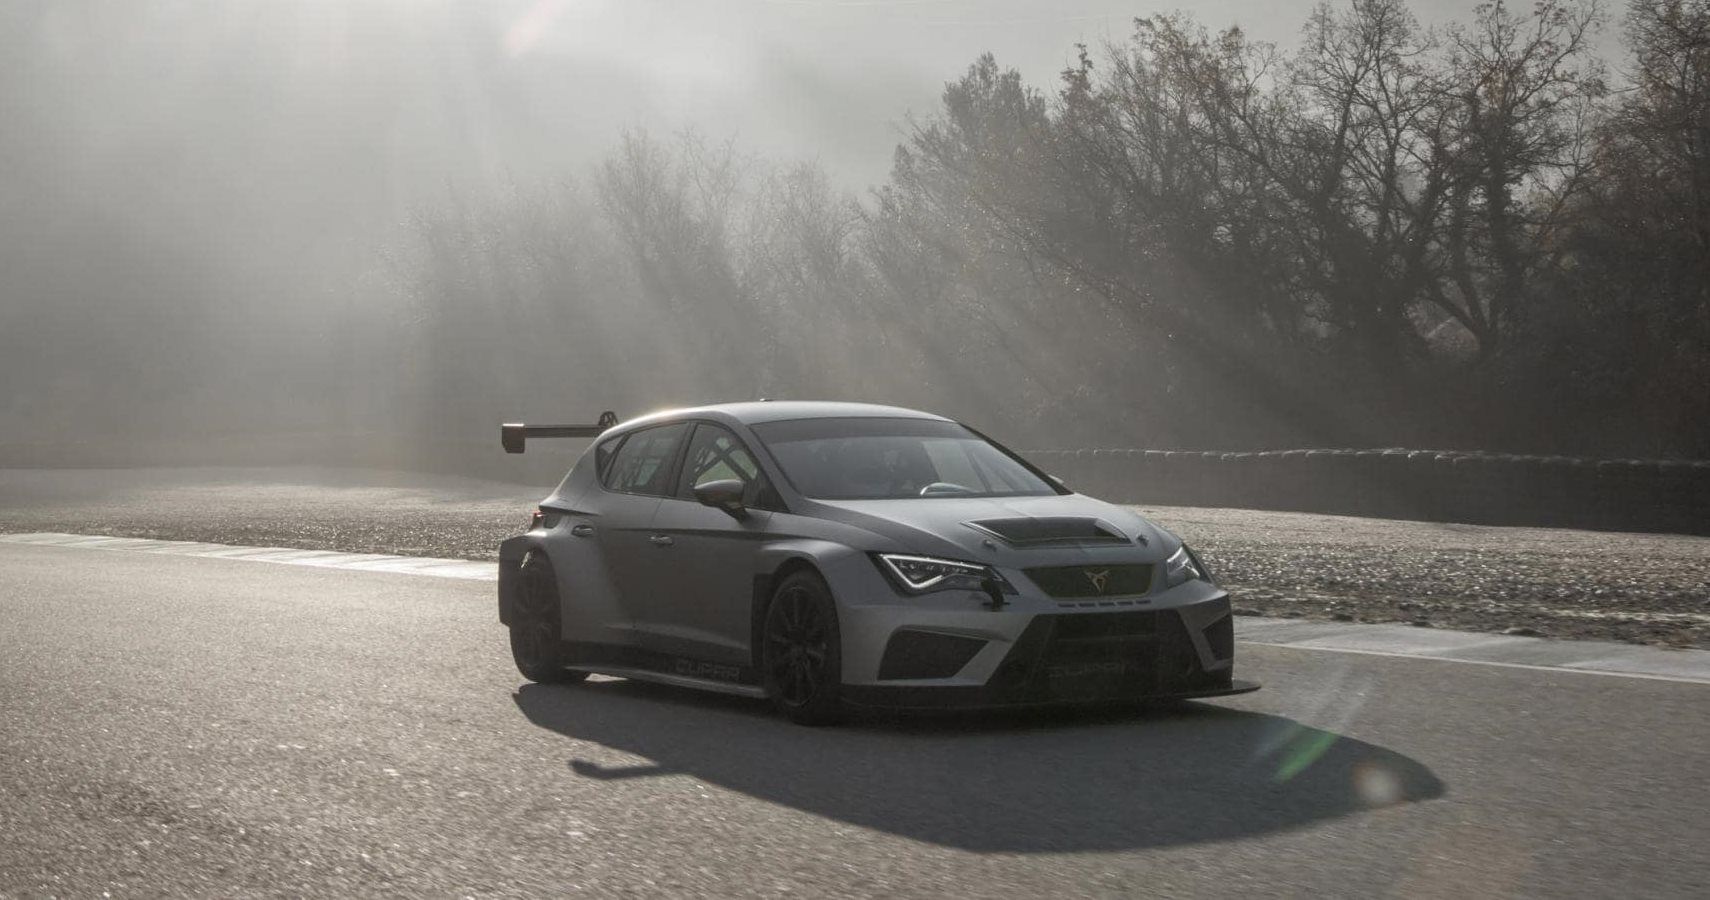 Review: Cupra TCR - Spanish Flair In A Touring Car